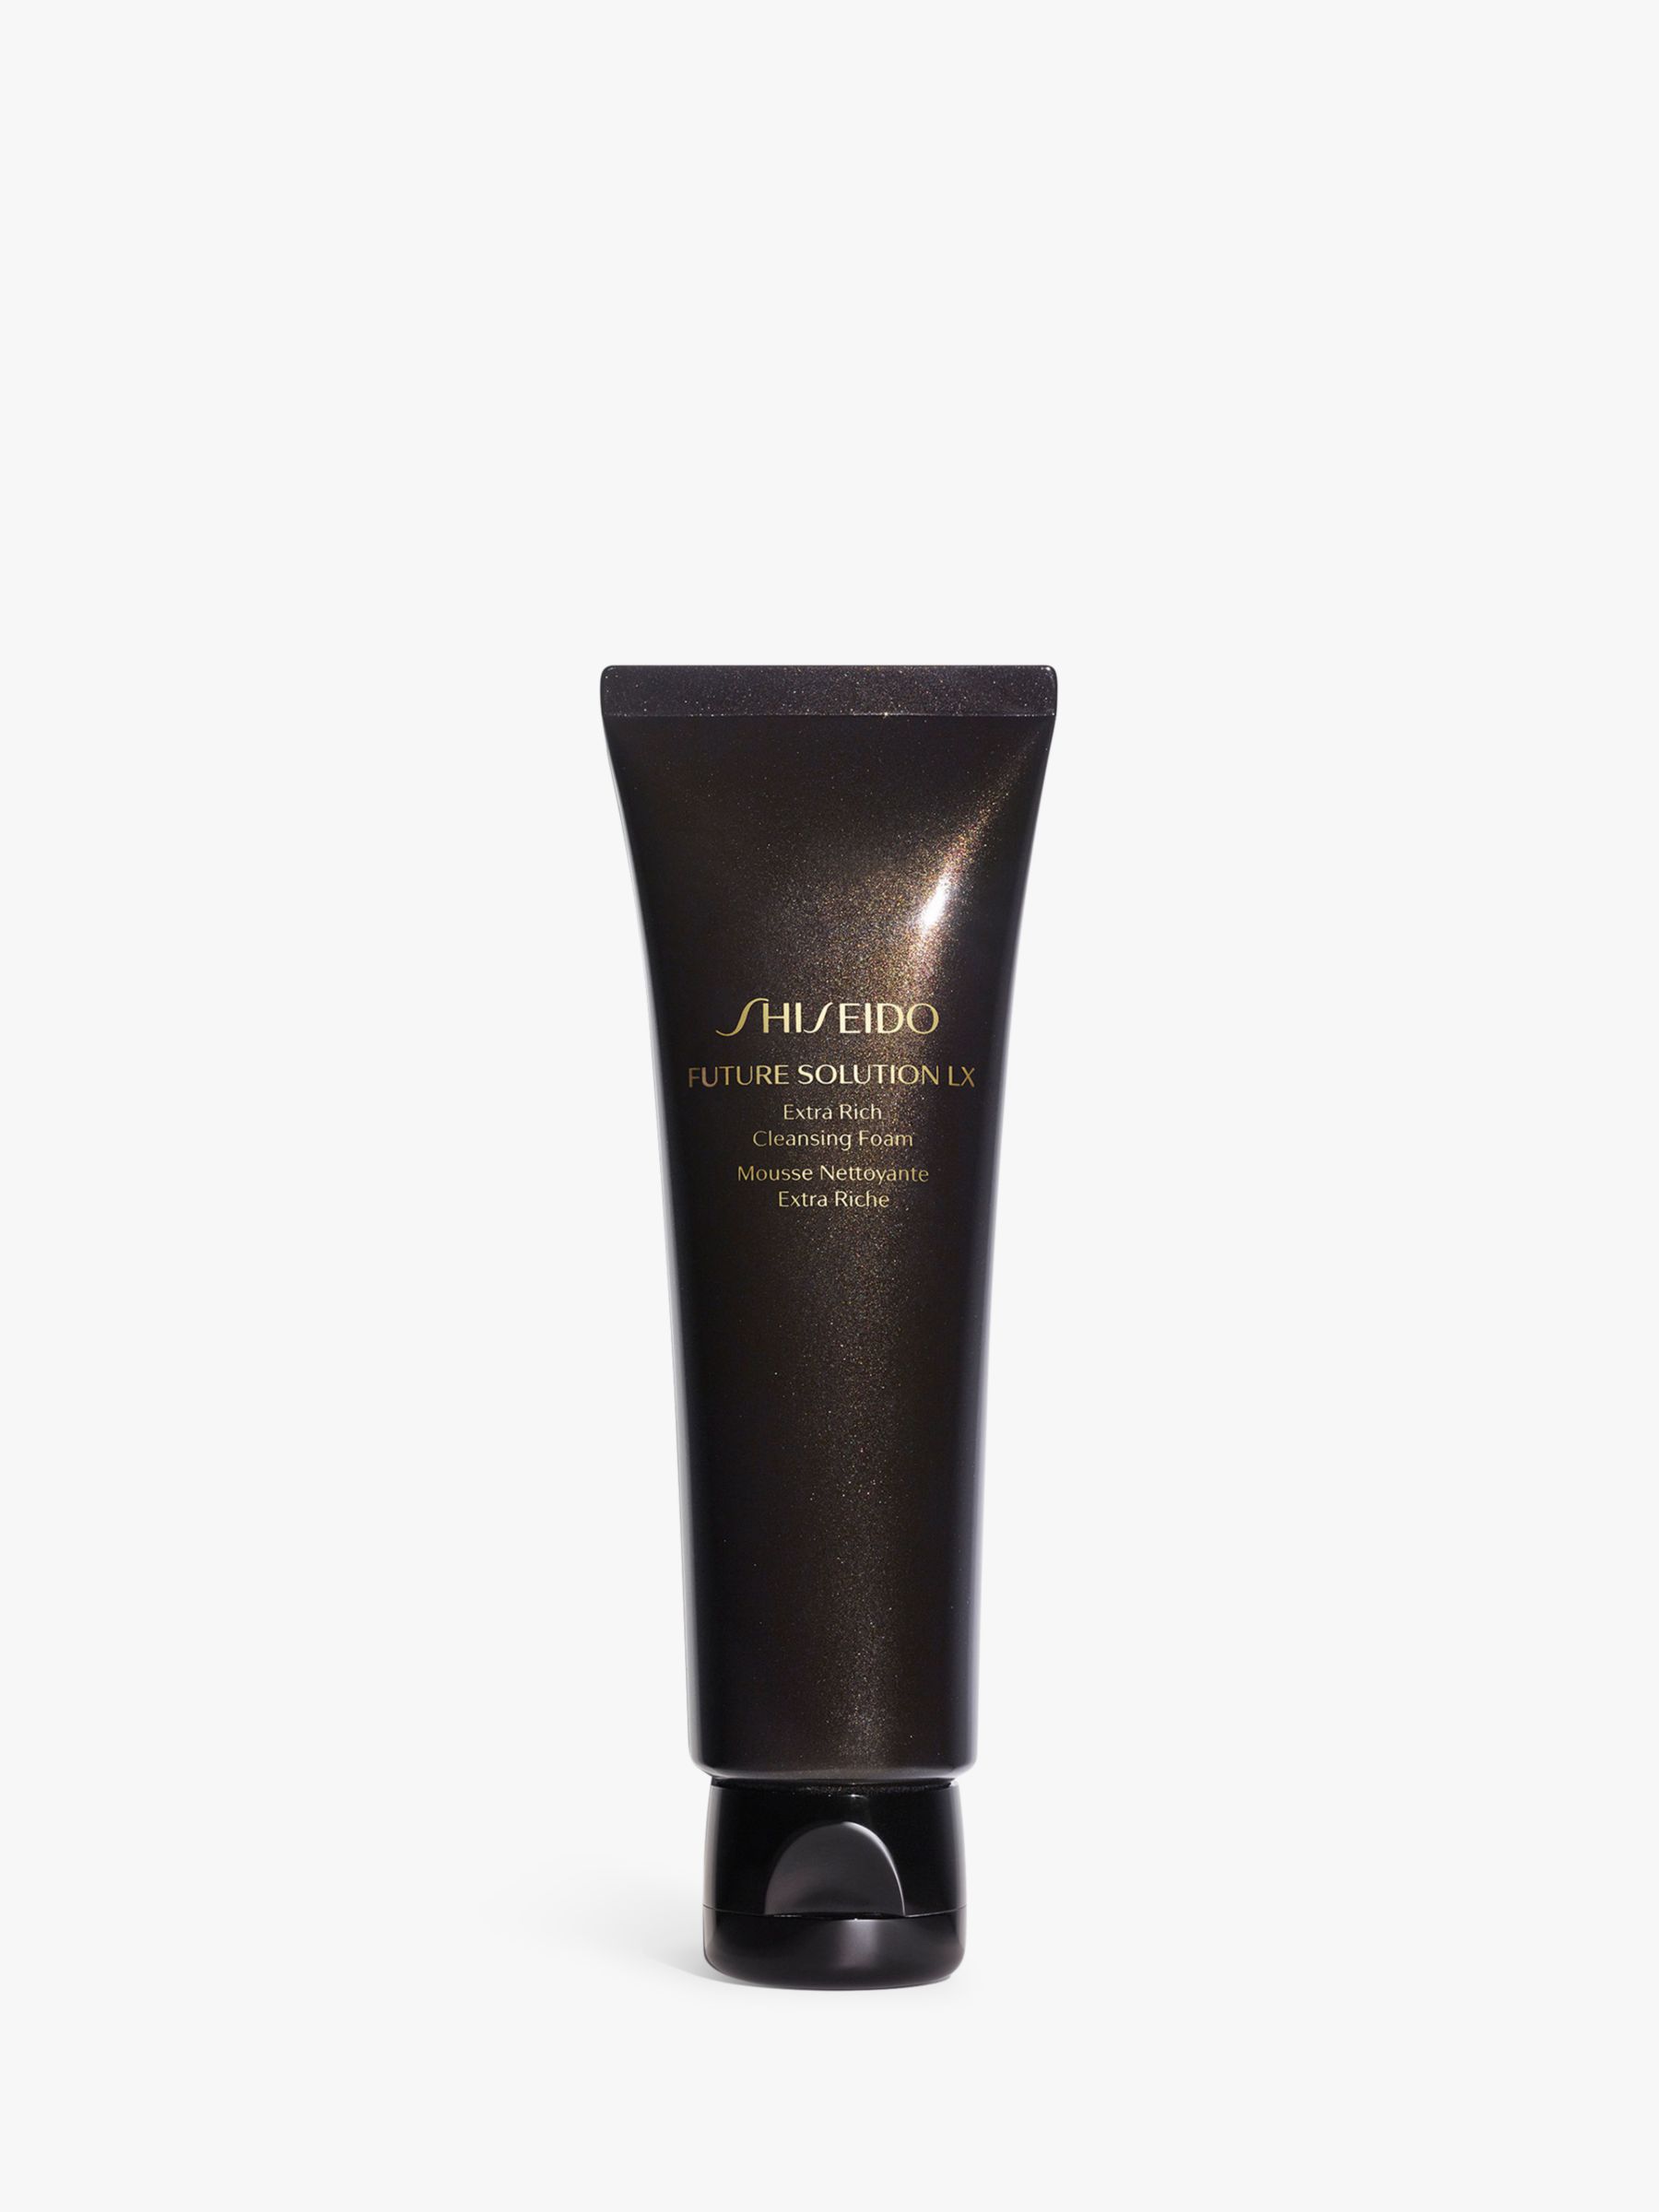 Shiseido Future Solution LX Extra Rich Cleansing Foam, 125ml 1